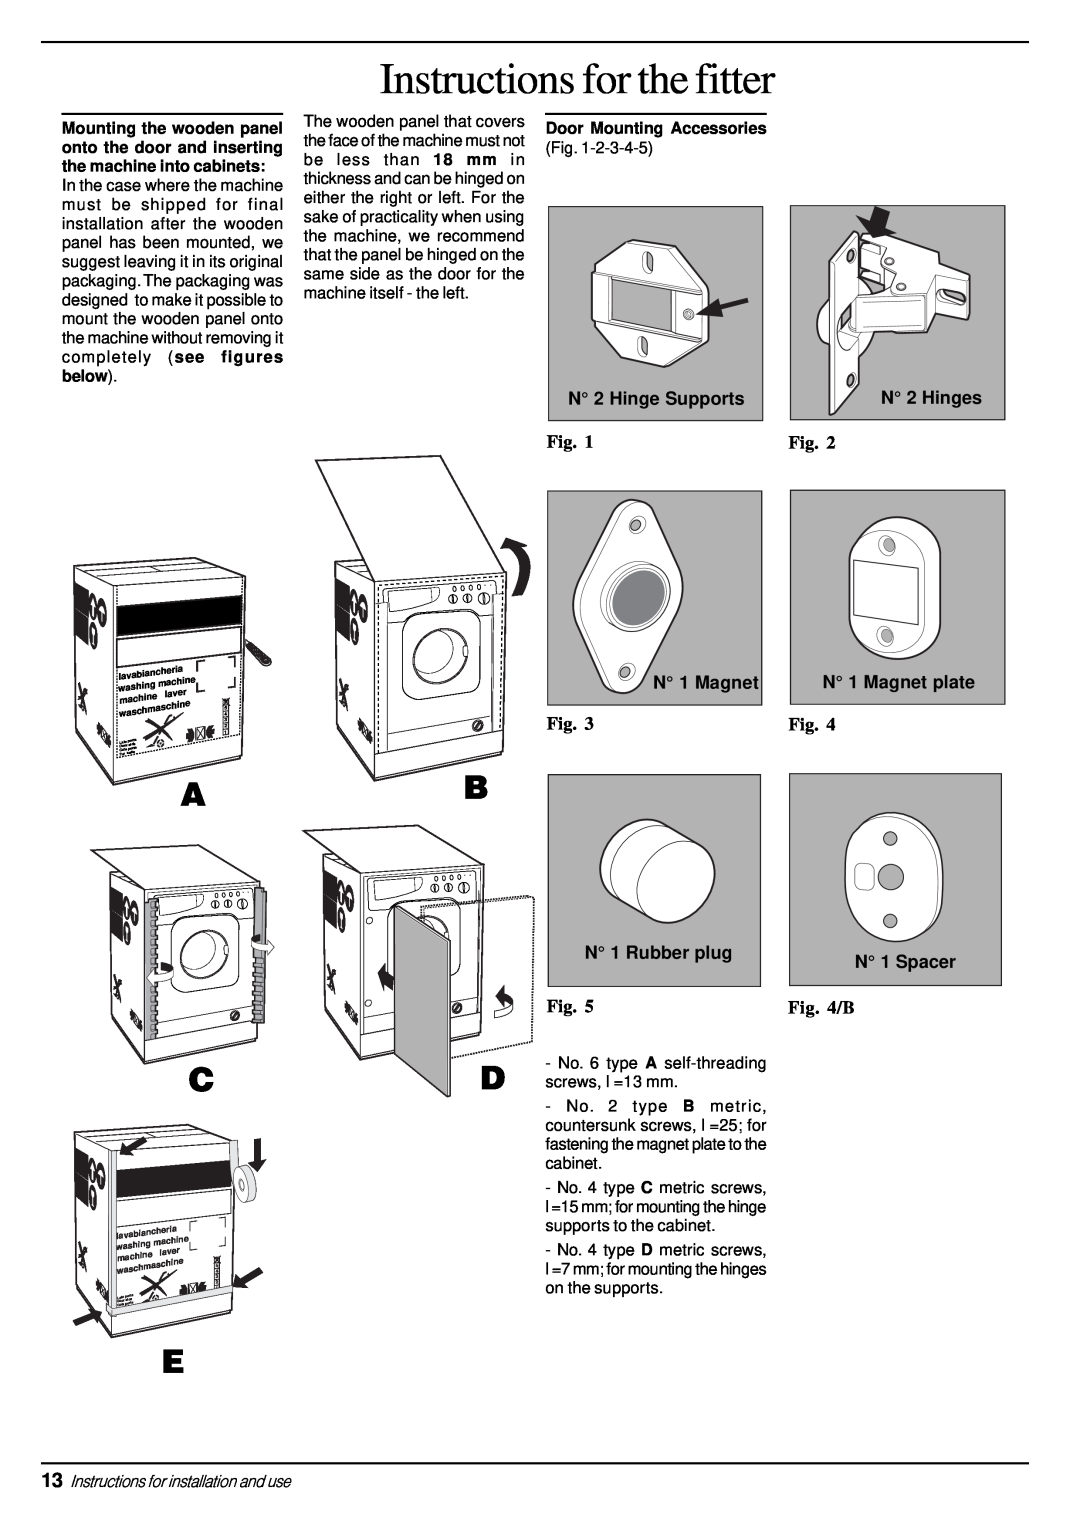 Indesit WD 12 X Instructions for the fitter, N 2 Hinge Supports, N 2 Hinges, N 1 Magnet, N 1 Rubber plug, B, washing, lava 